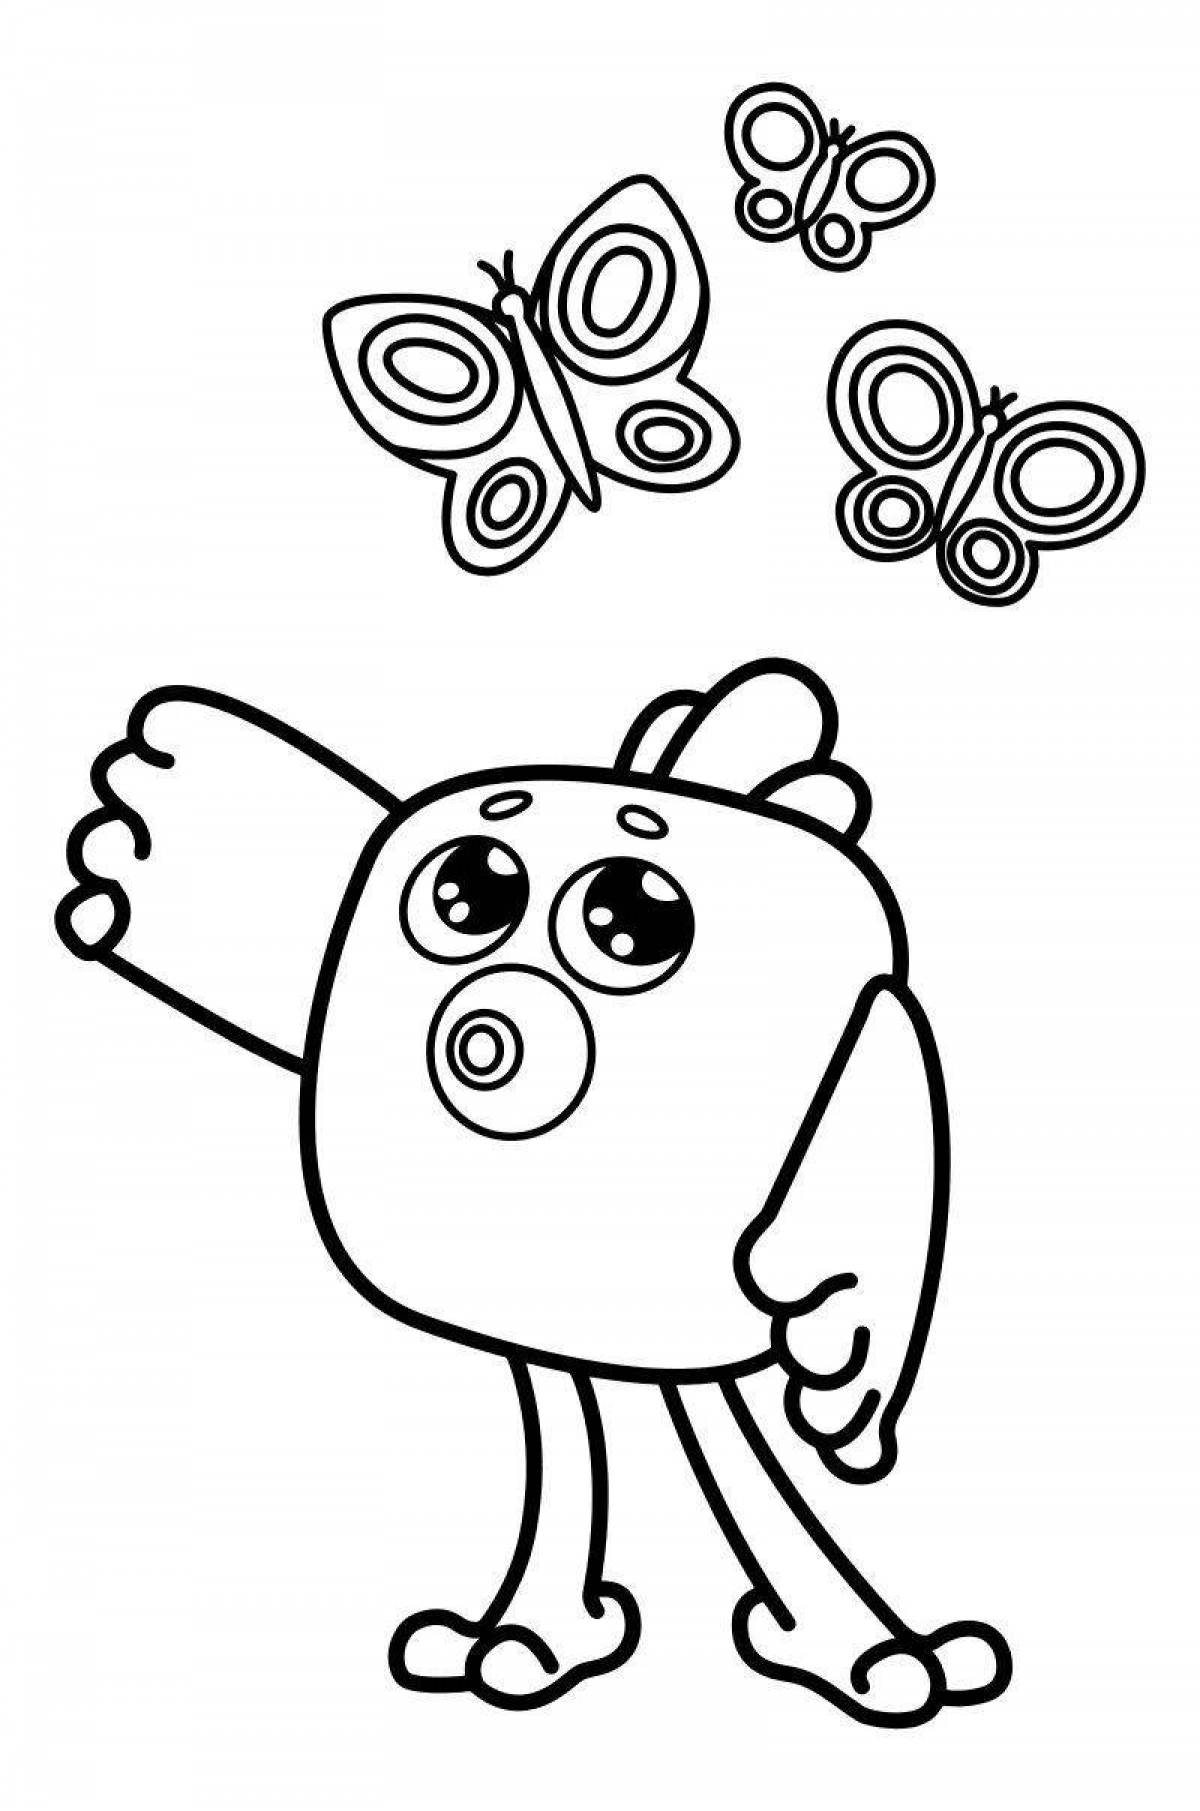 Cute and playful cute chick coloring book